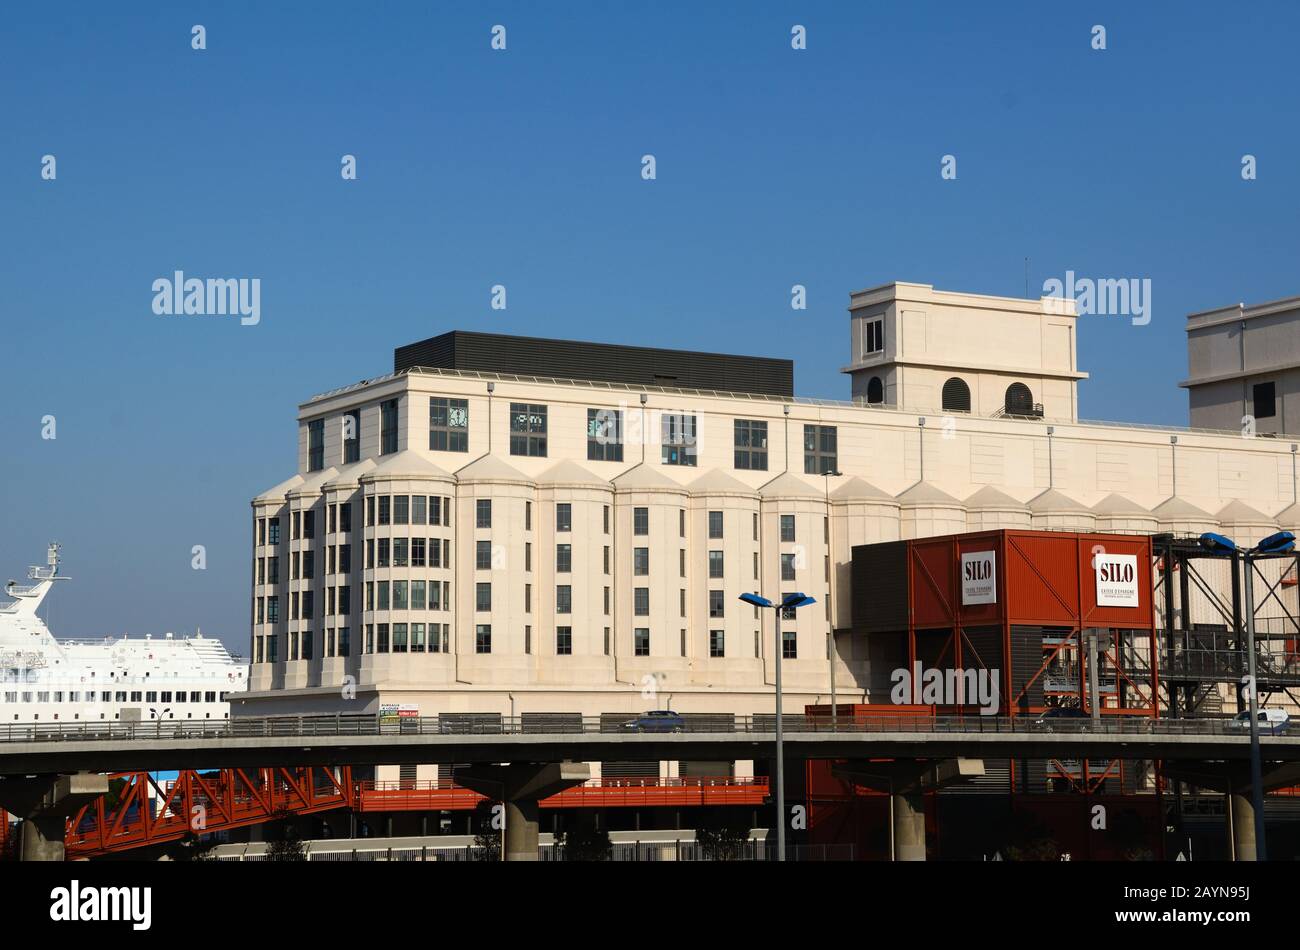 Le Silo aka CEPAC Silo, a former cereal silo built in 1924, converted to Offices, Theatre & Entertainment Venue in 2011, Marseille Provence France Stock Photo